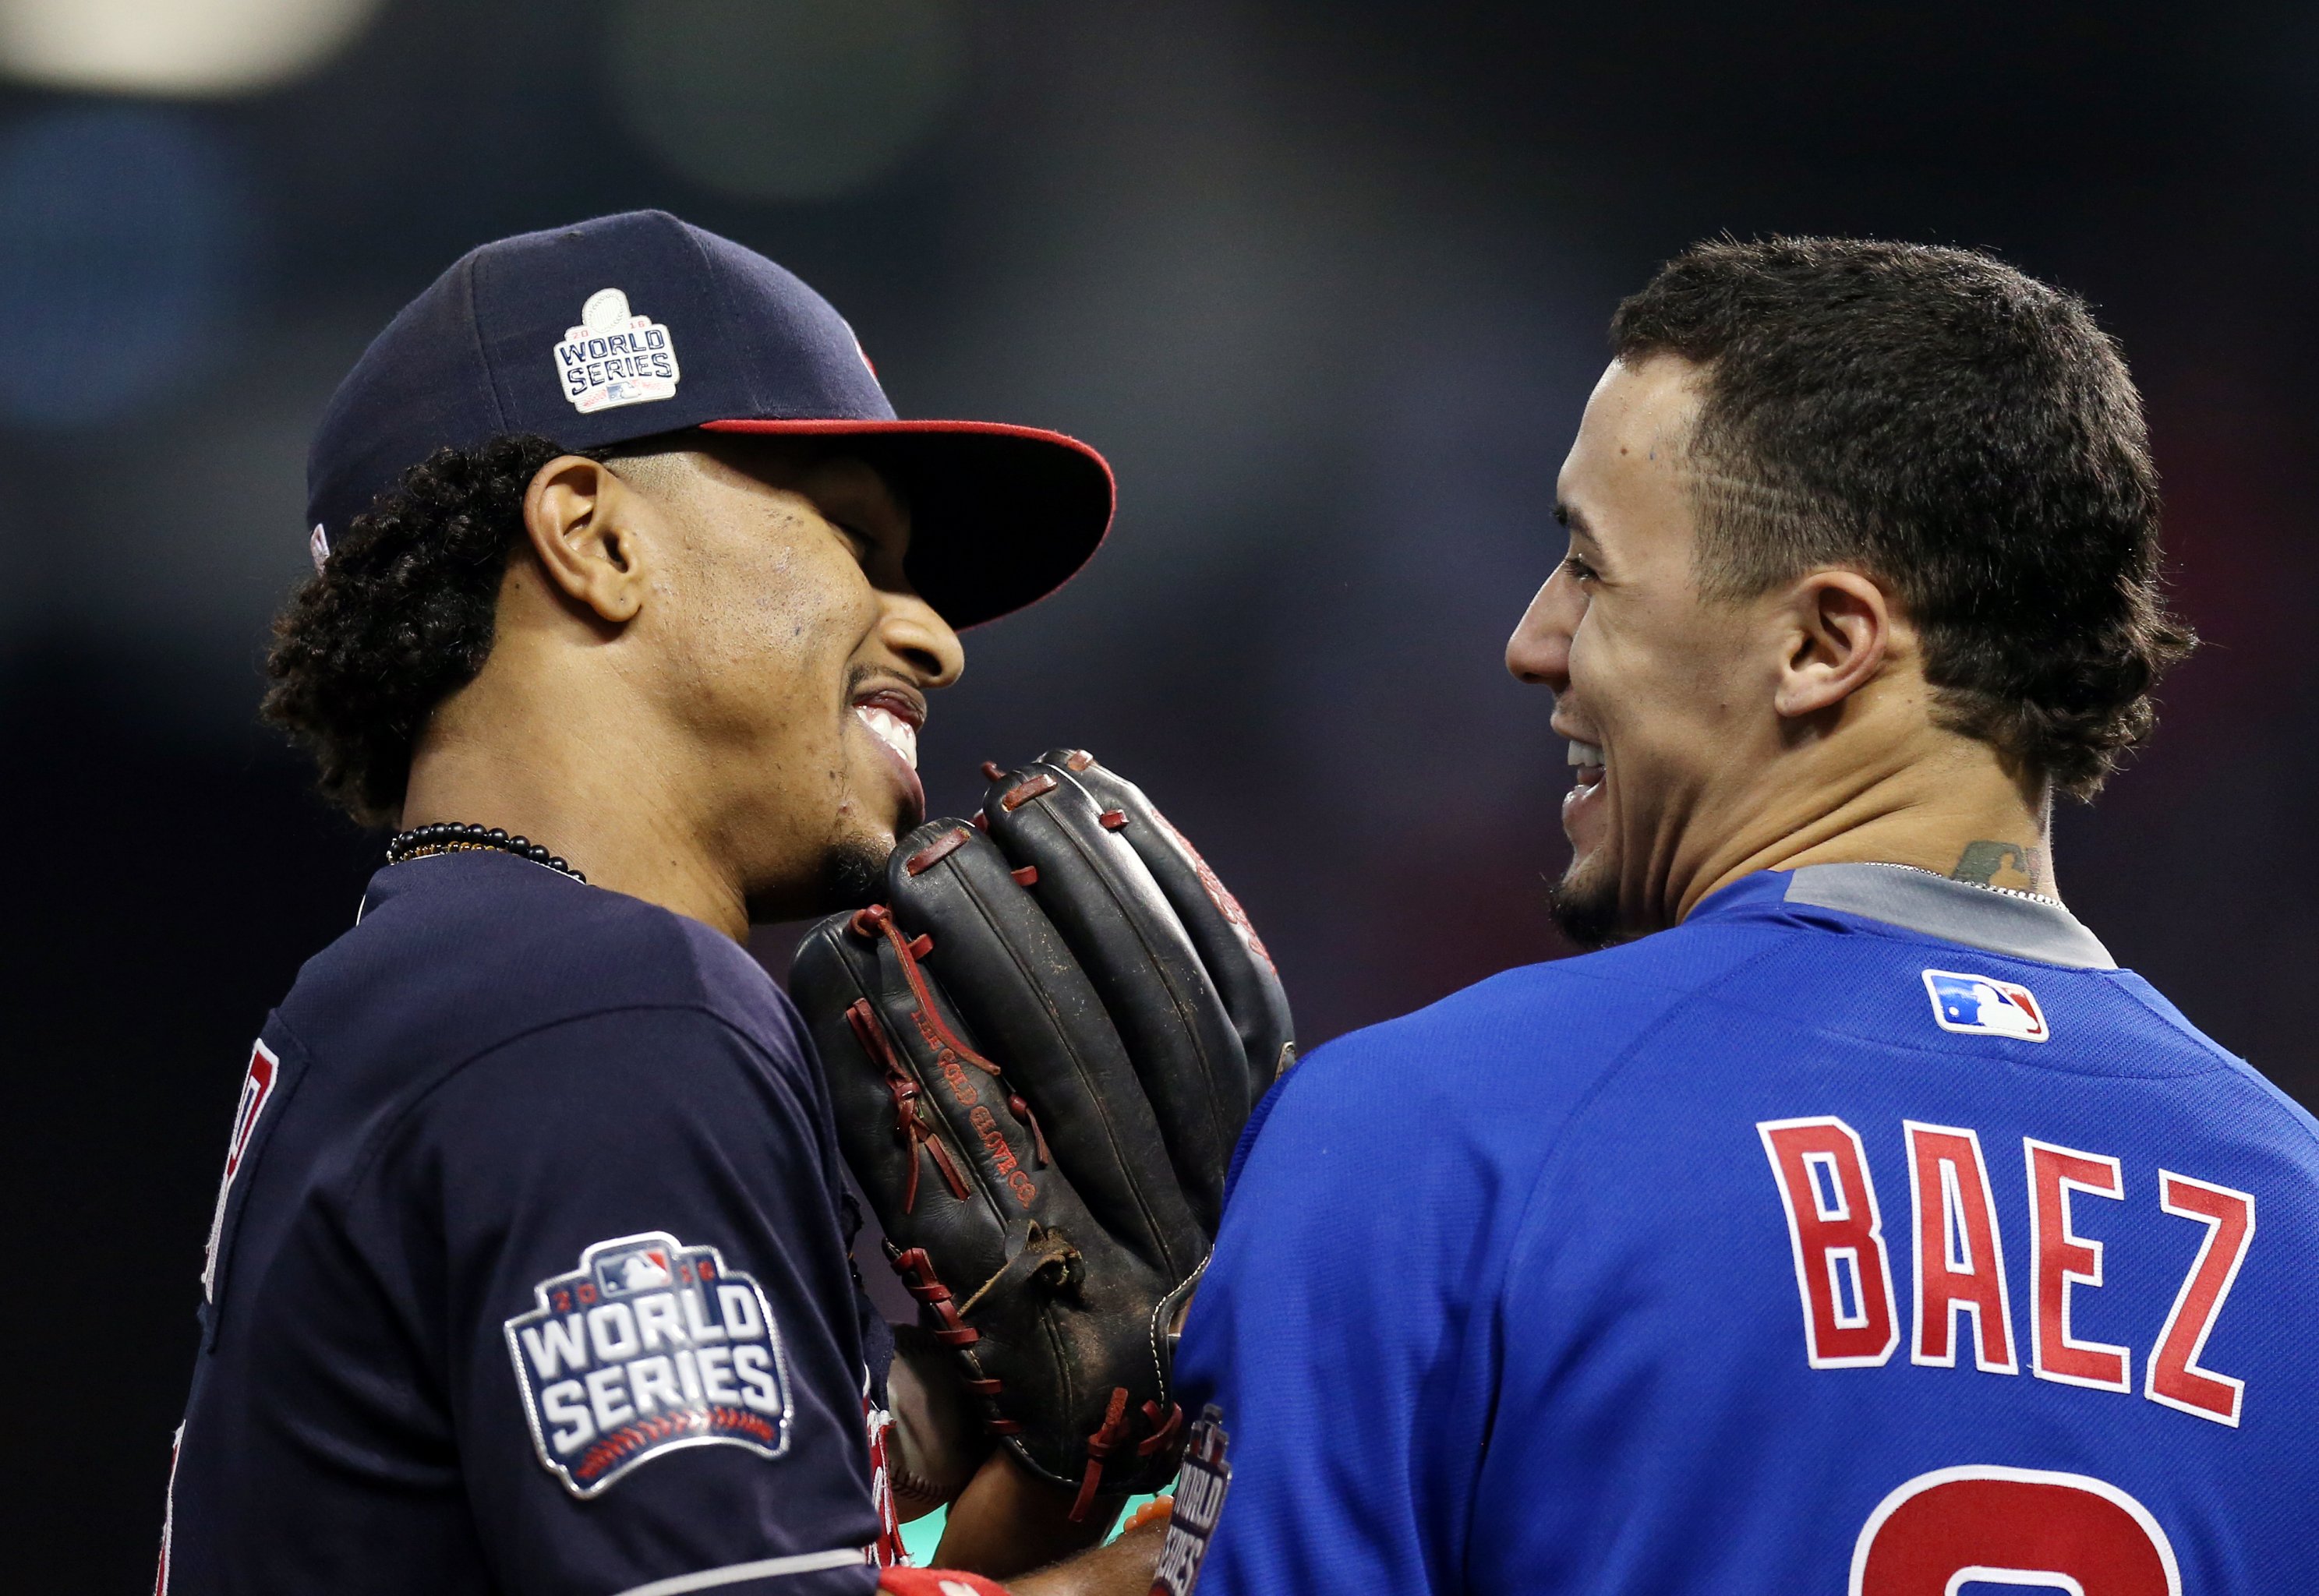 MLB - Chicago Cubs stud INF Javy Baez shows off his fresh new